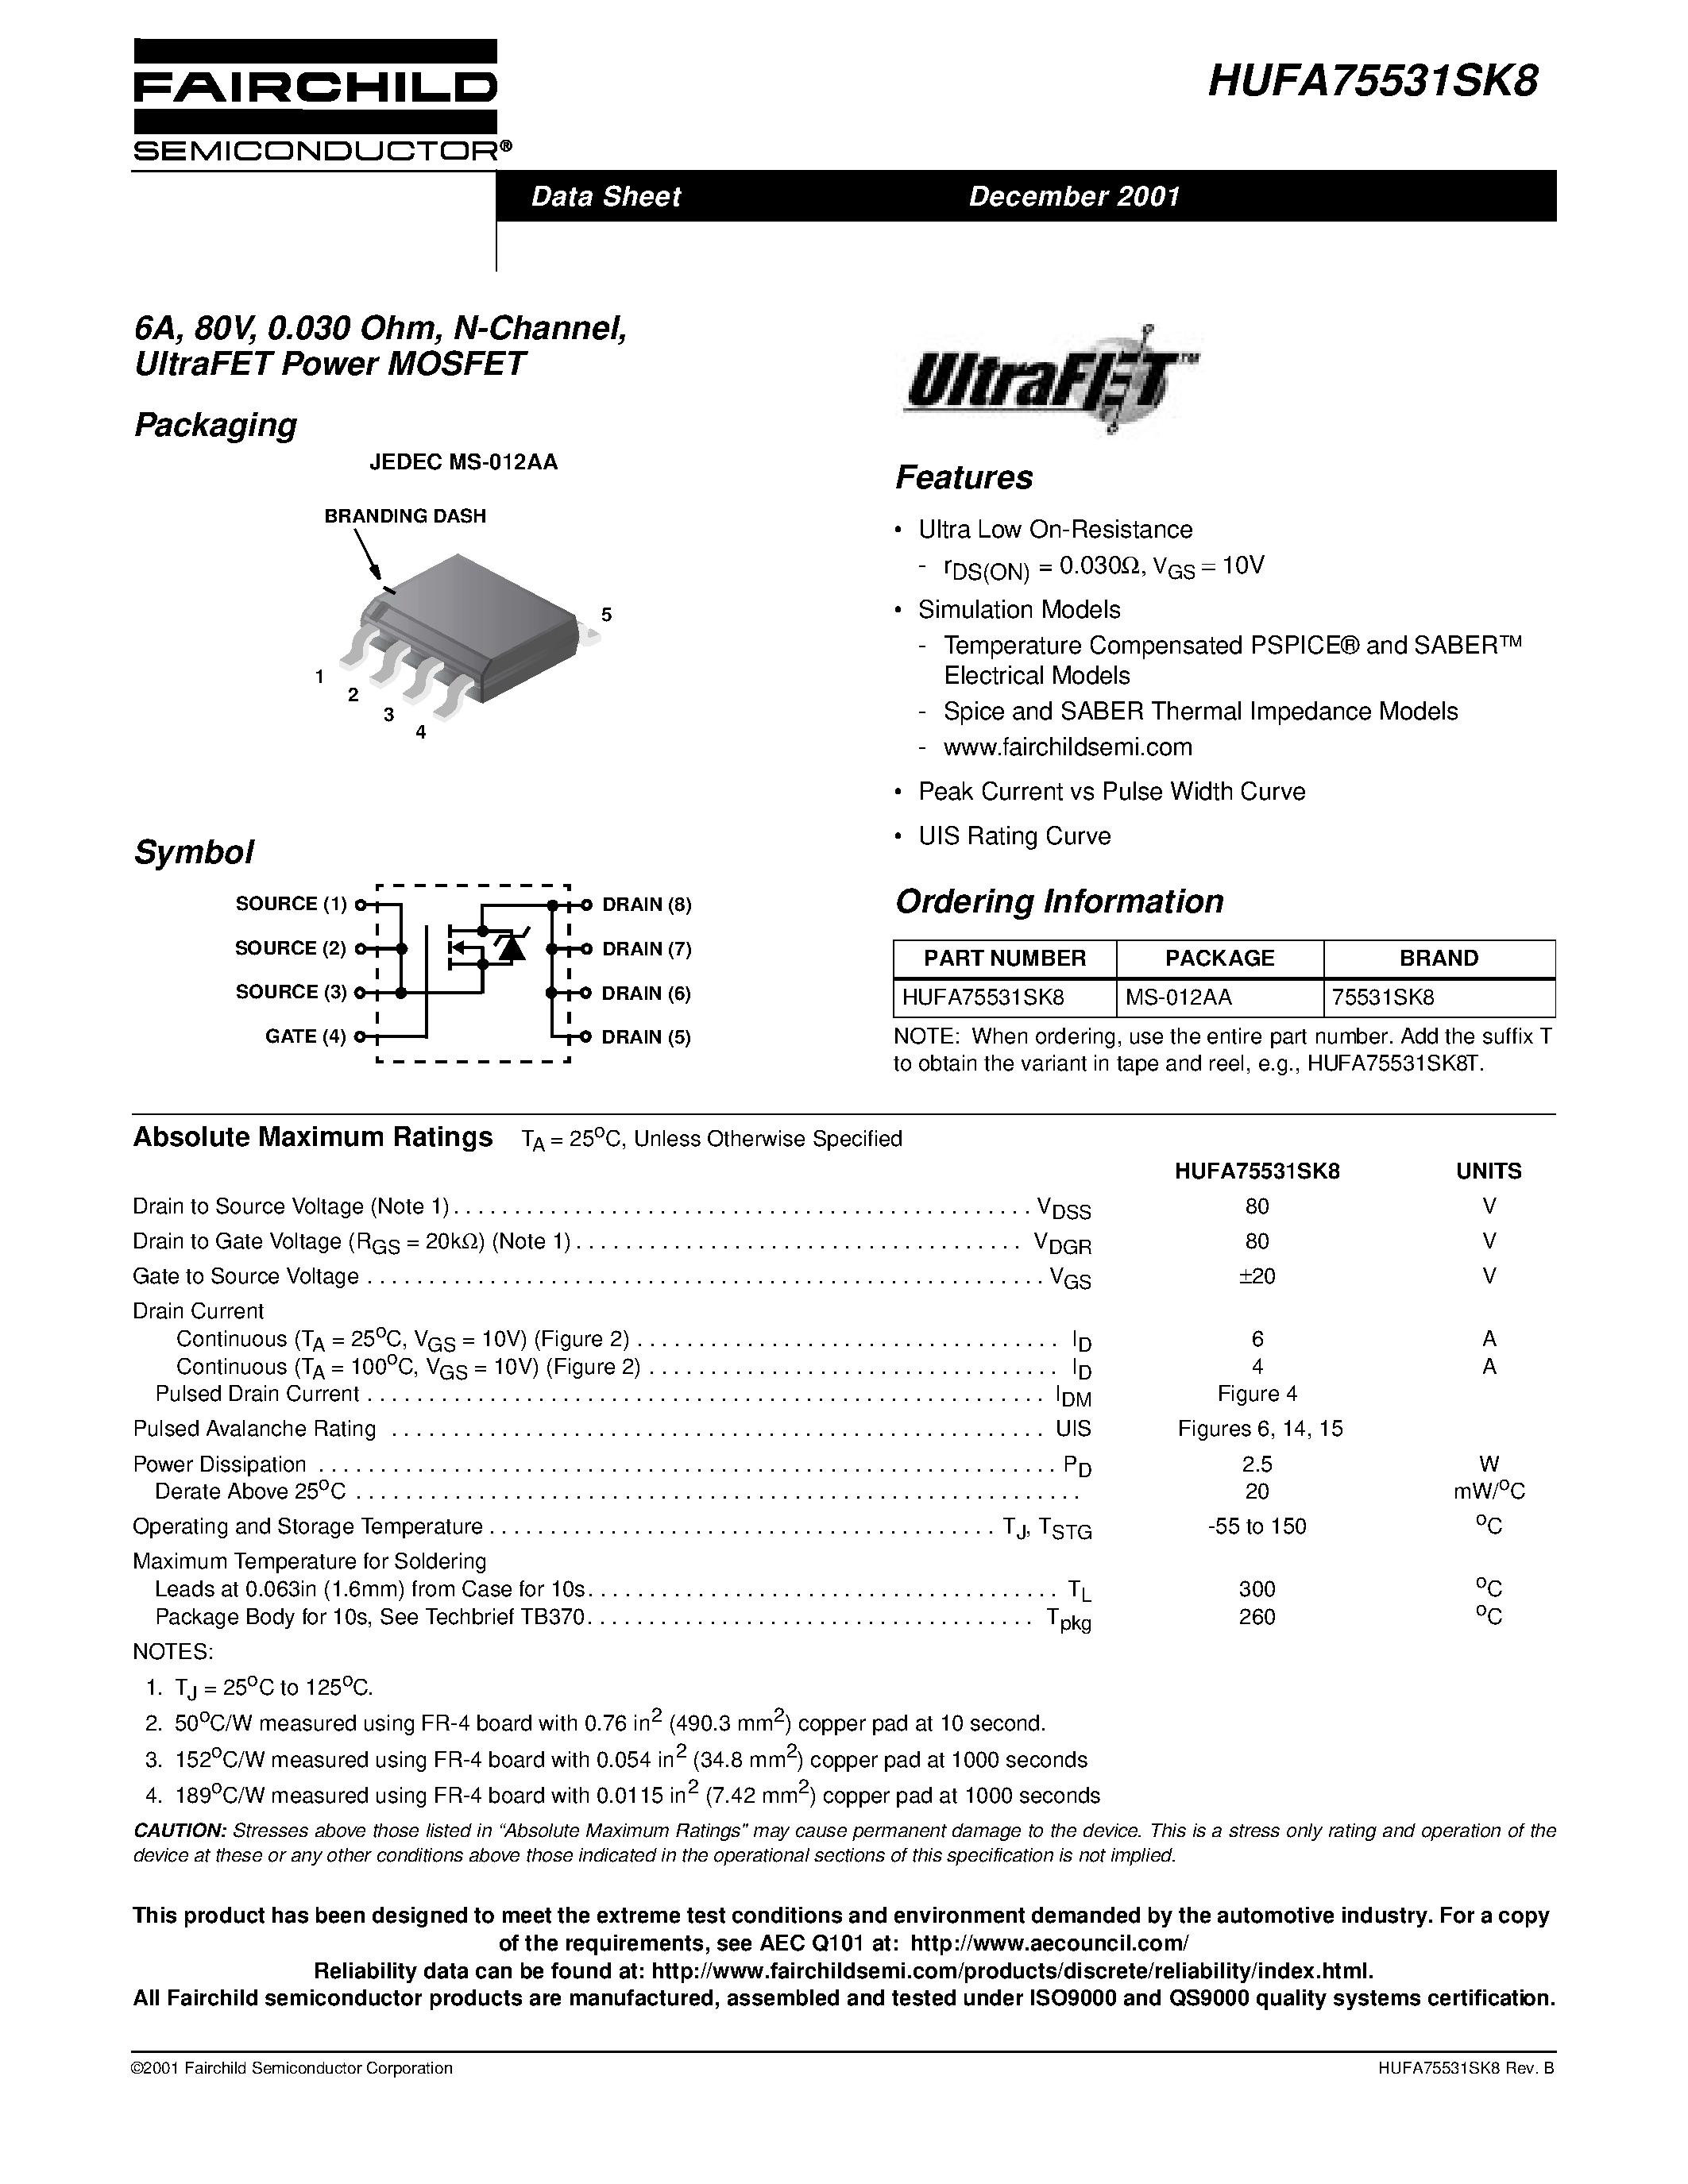 Datasheet HUFA75531SK8 - 6A/ 80V/ 0.030 Ohm/ N-Channel/ UltraFET Power MOSFET page 1